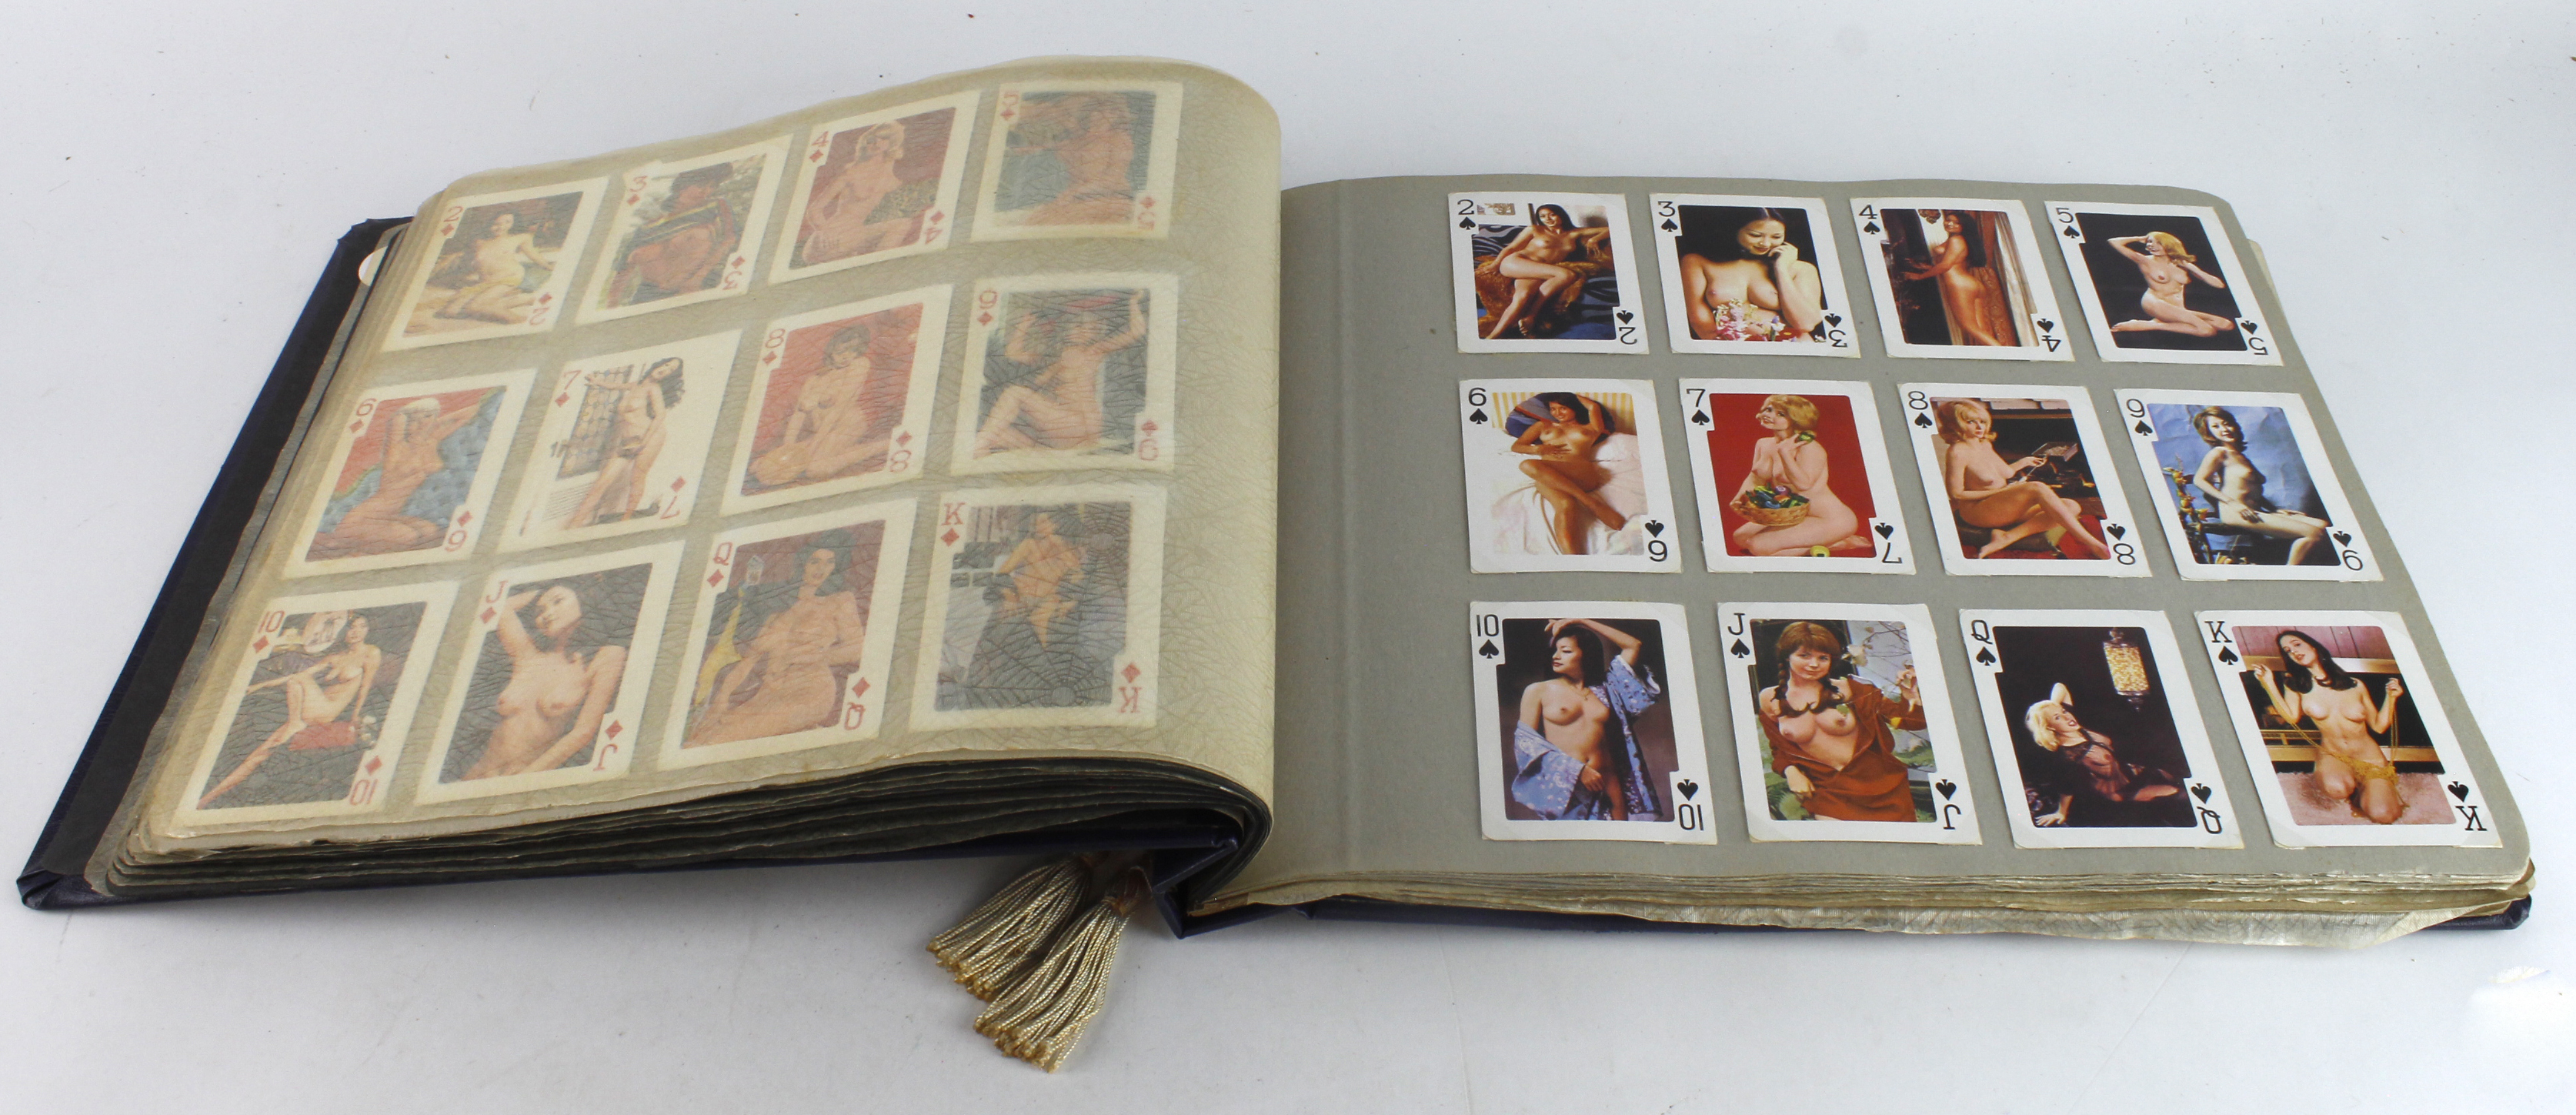 Large album with playing card sets contained in photo corners, erotic material, view with caution!